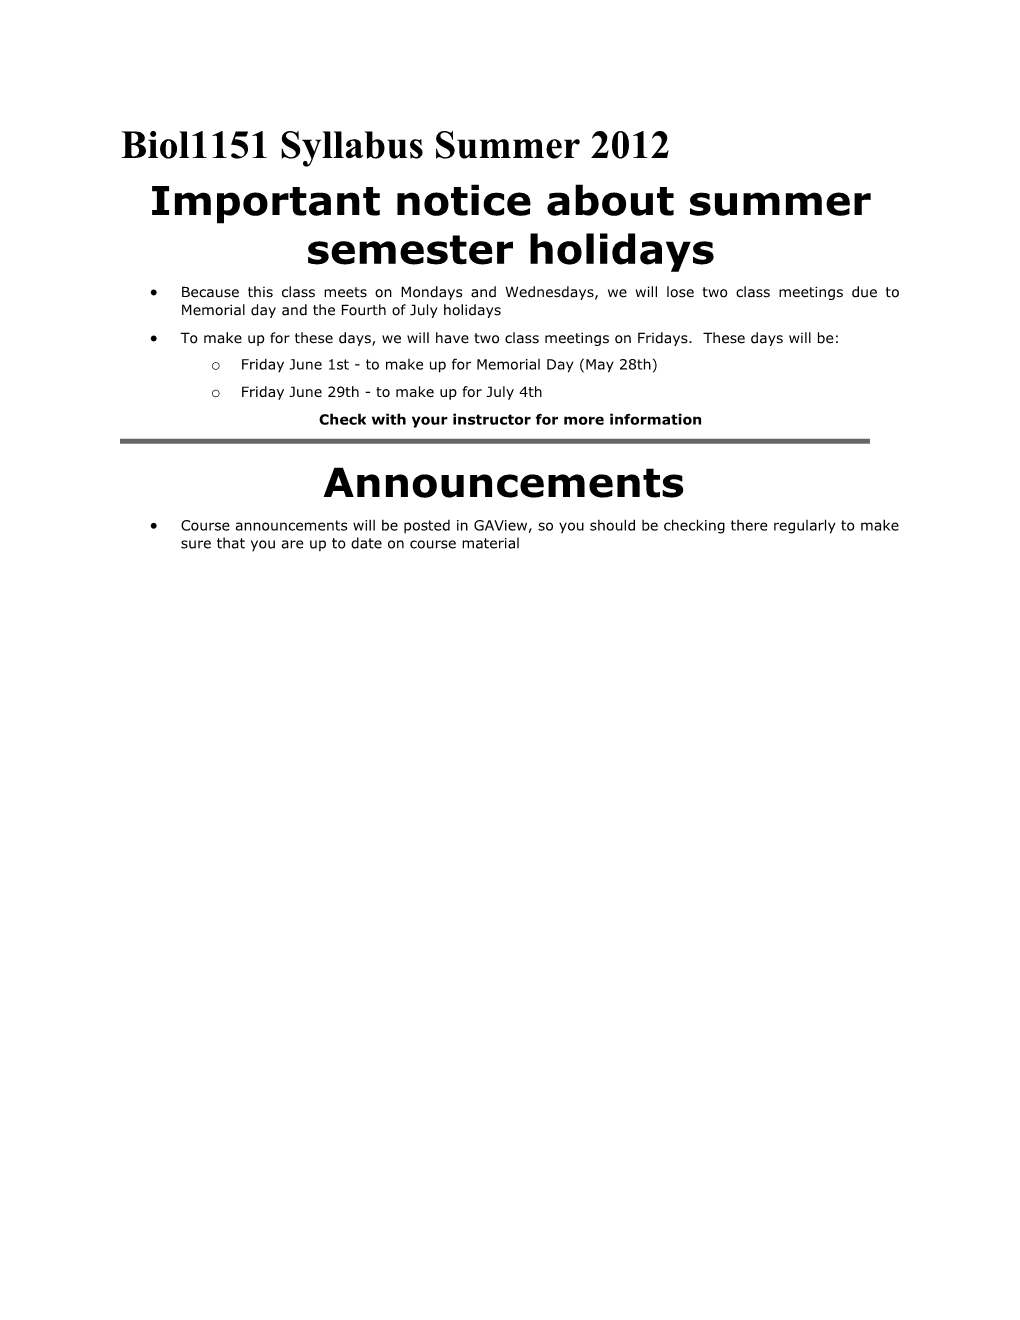 Important Notice About Summer Semester Holidays